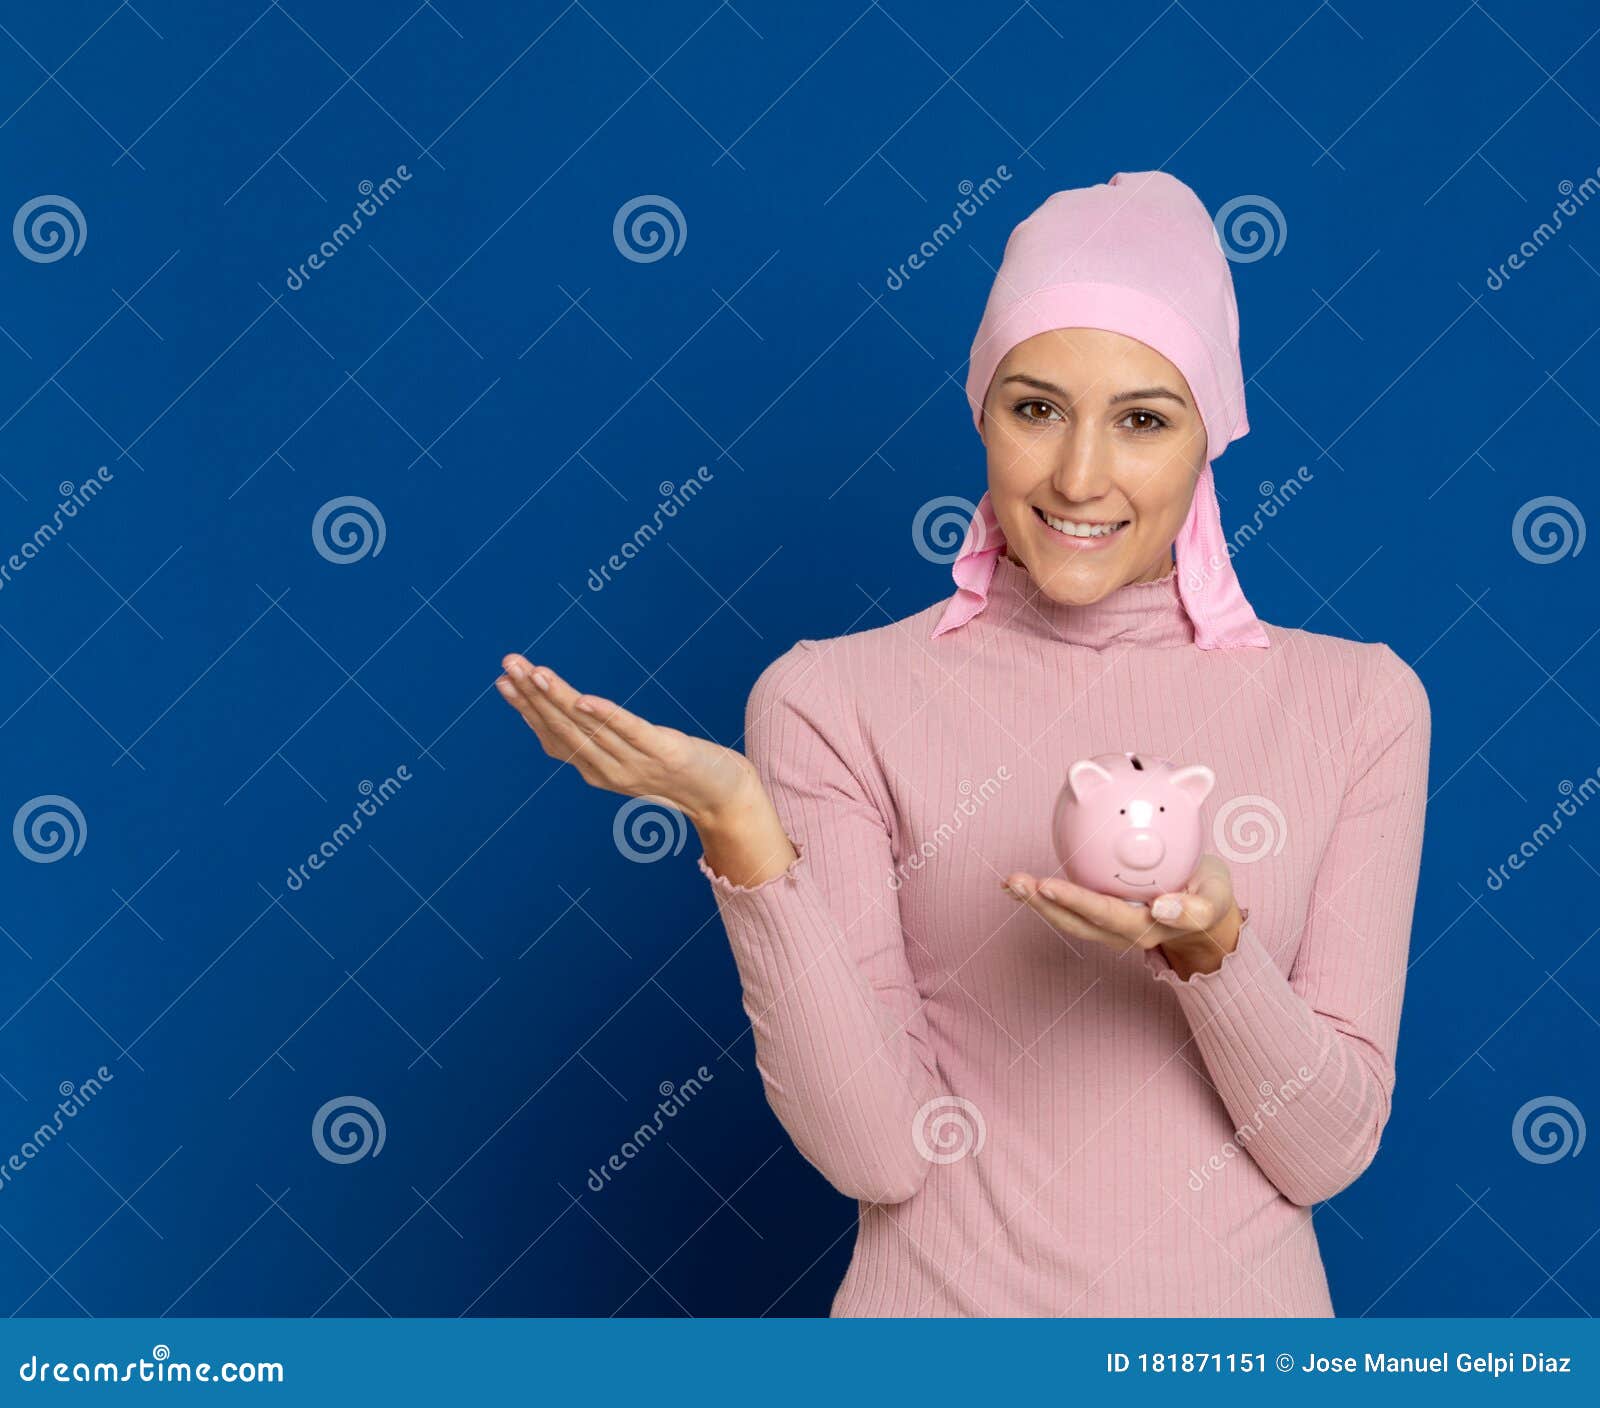 Young Woman with Pink Scarf on the Head Stock Image - Image of oncology ...